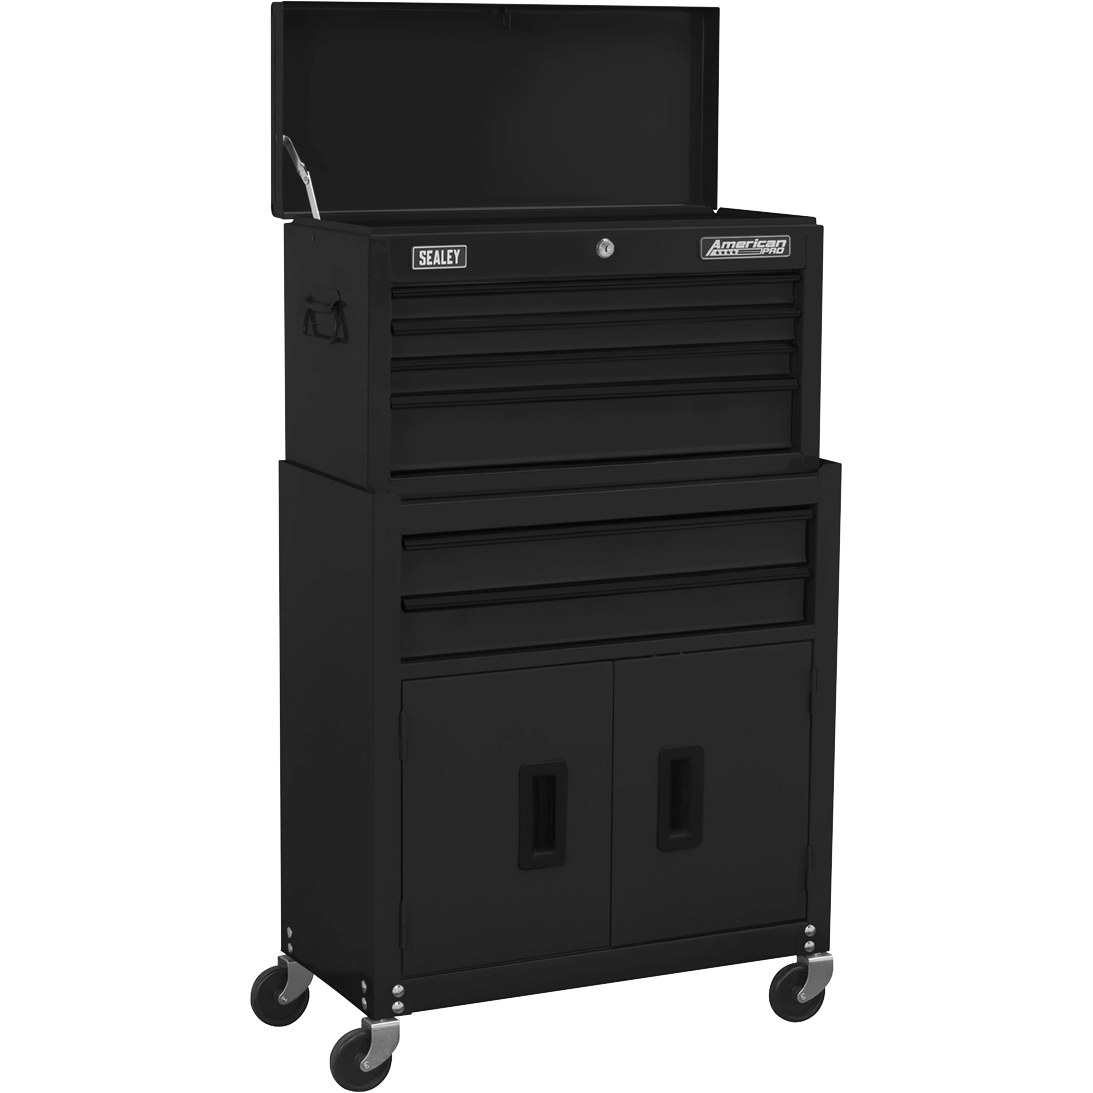 Sealey 6 Drawer Top Chest and Tool Roller Cabinet Combination Black